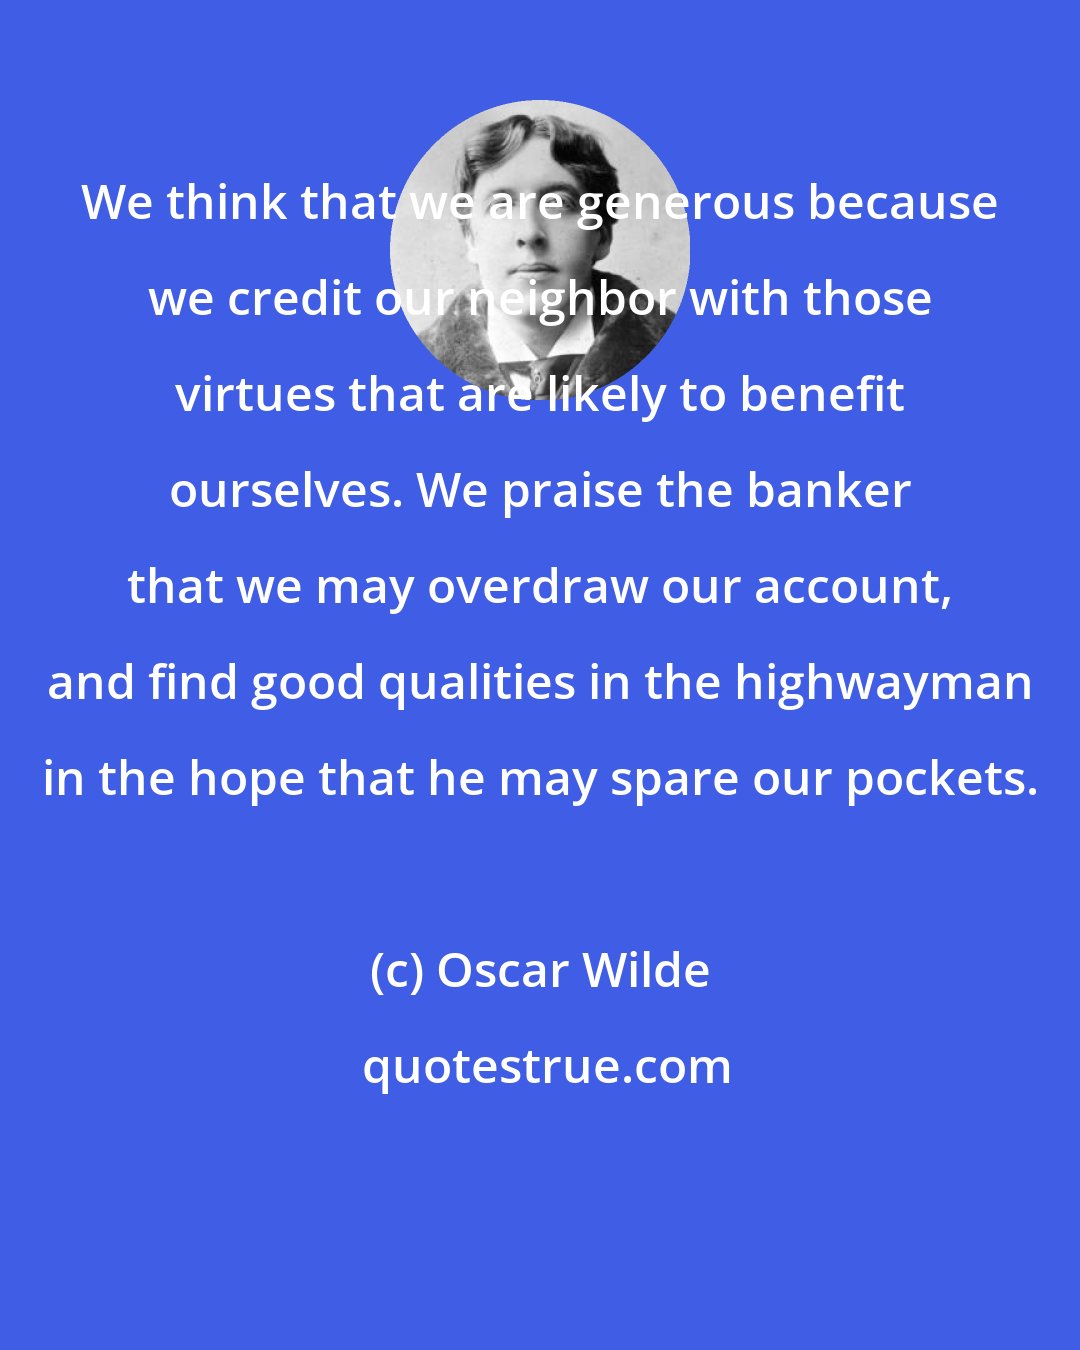 Oscar Wilde: We think that we are generous because we credit our neighbor with those virtues that are likely to benefit ourselves. We praise the banker that we may overdraw our account, and find good qualities in the highwayman in the hope that he may spare our pockets.